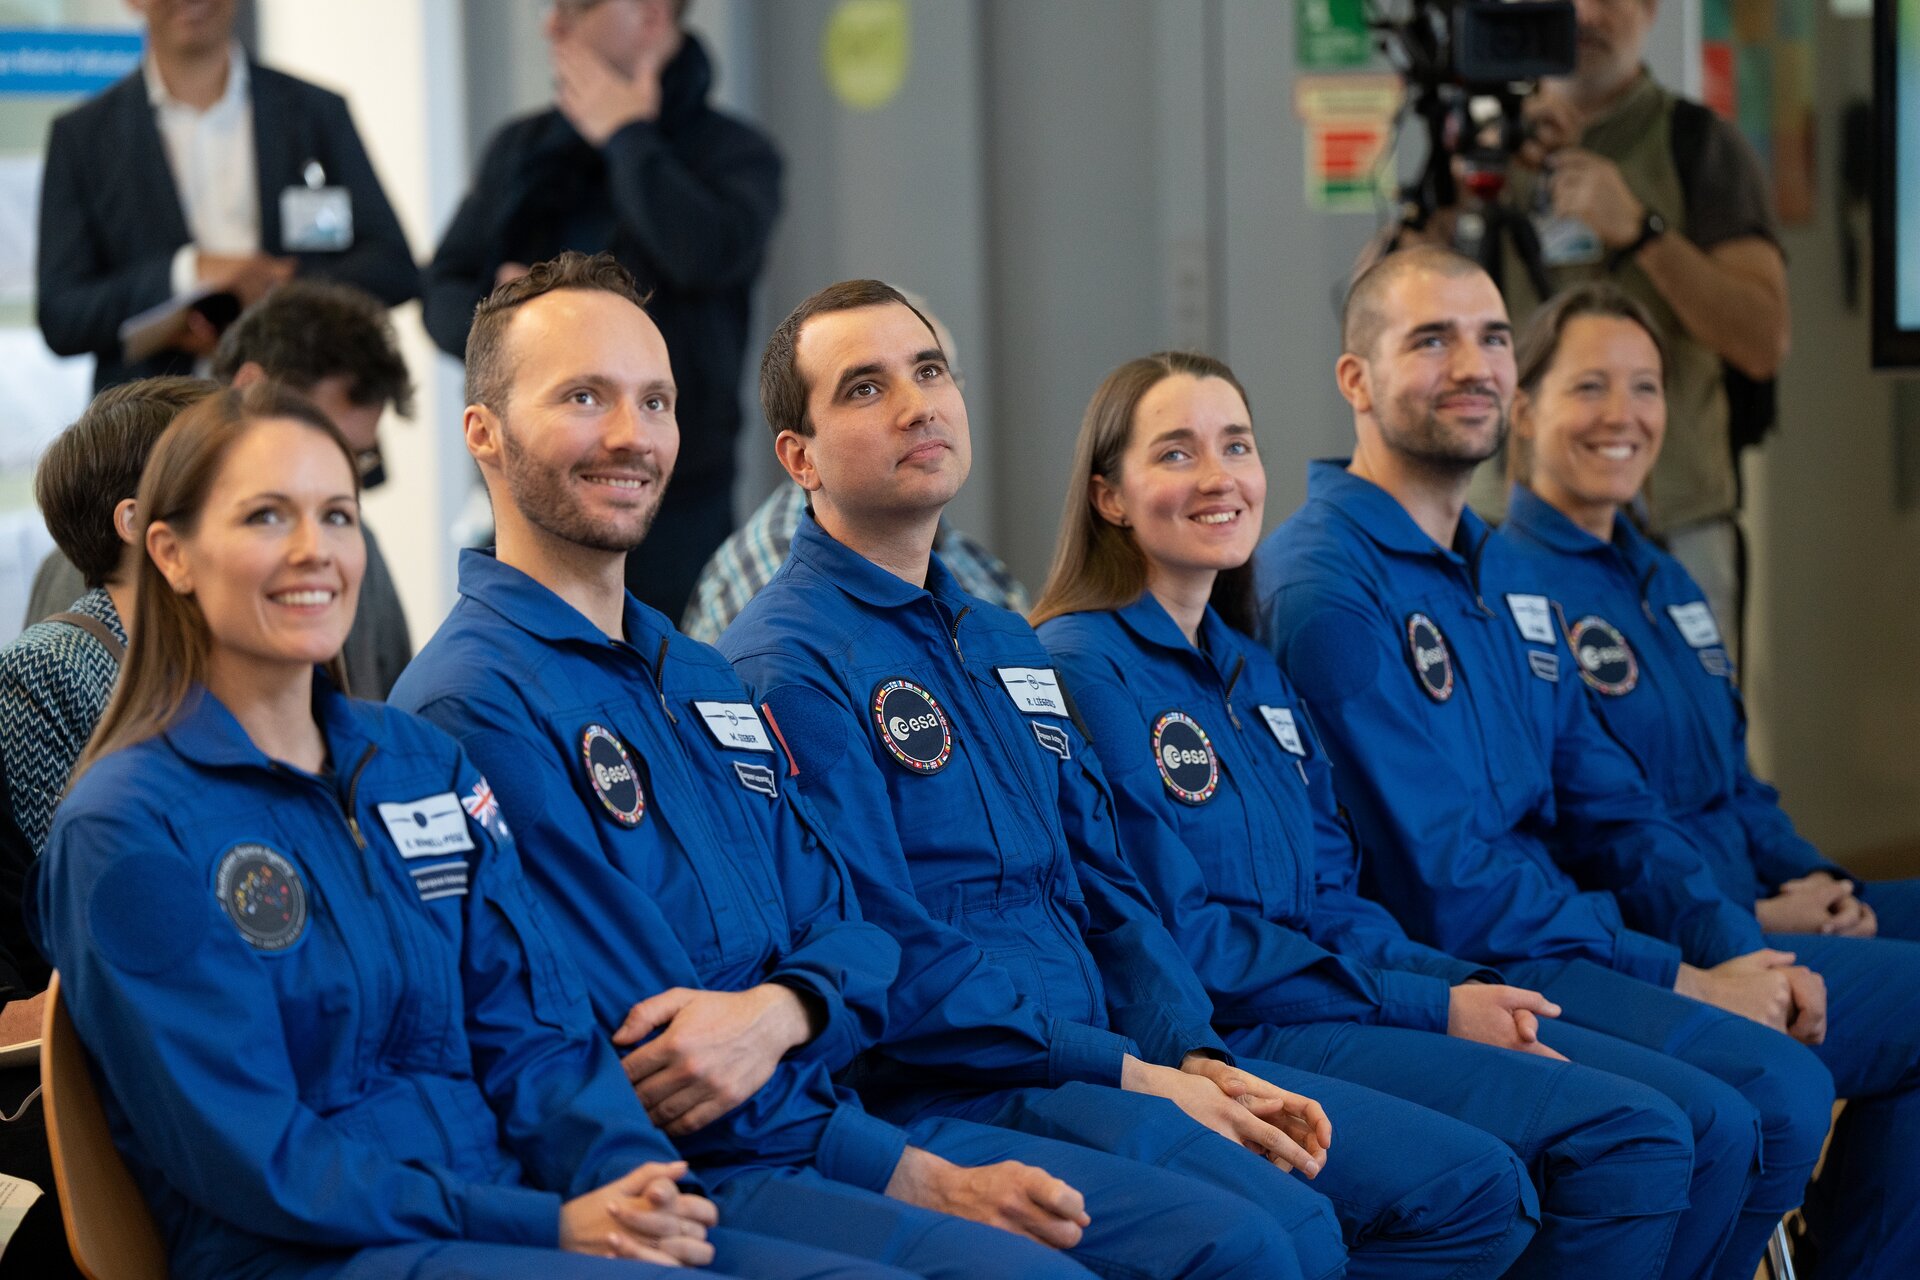 First news conference astronaut candidates